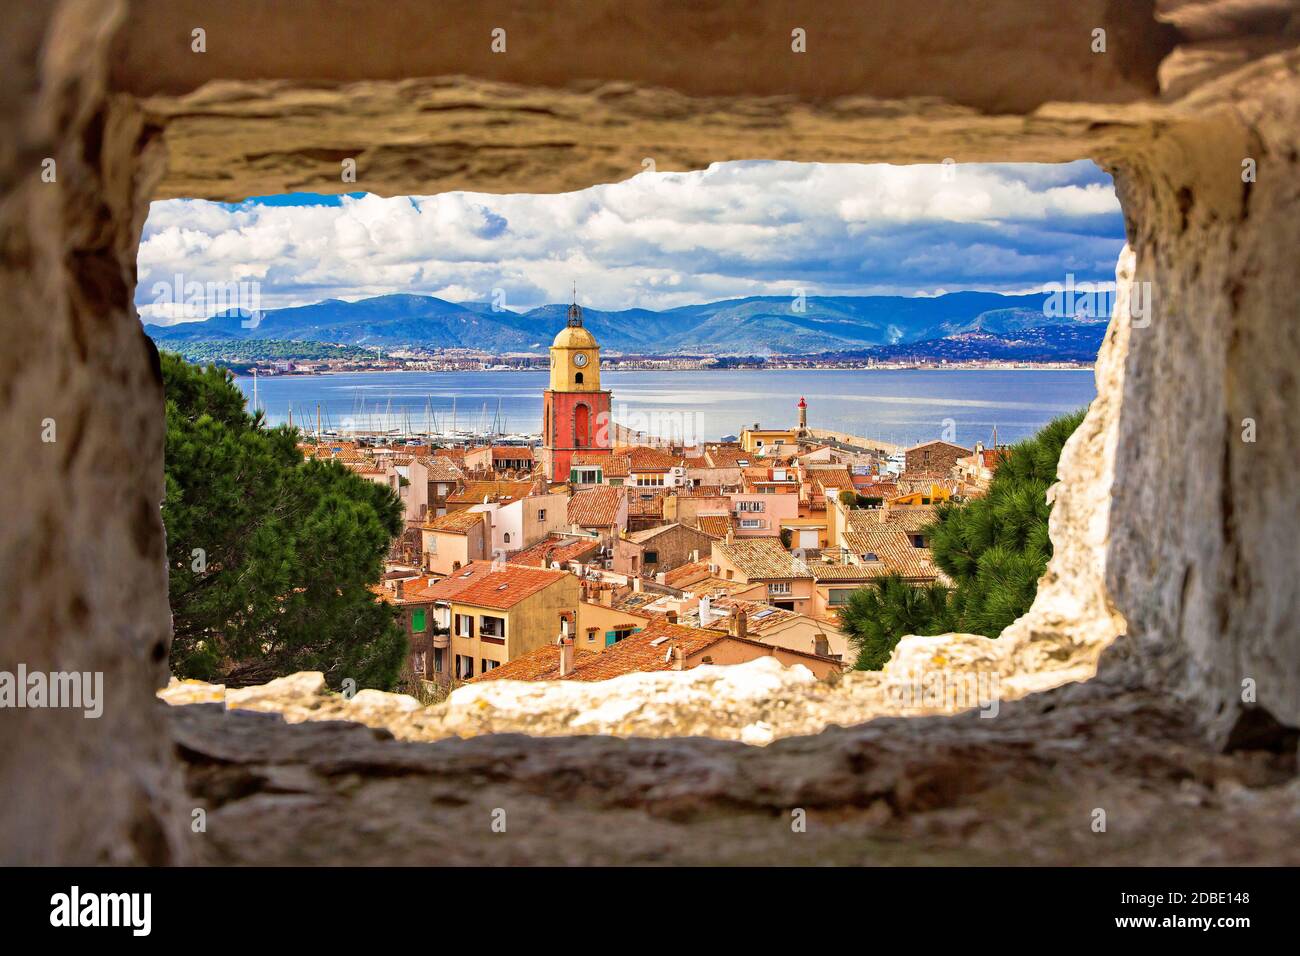 Saint Tropez village church tower and old rooftops view through stone window, famous tourist destination on Cote d Azur, Alpes-Maritimes department in Stock Photo